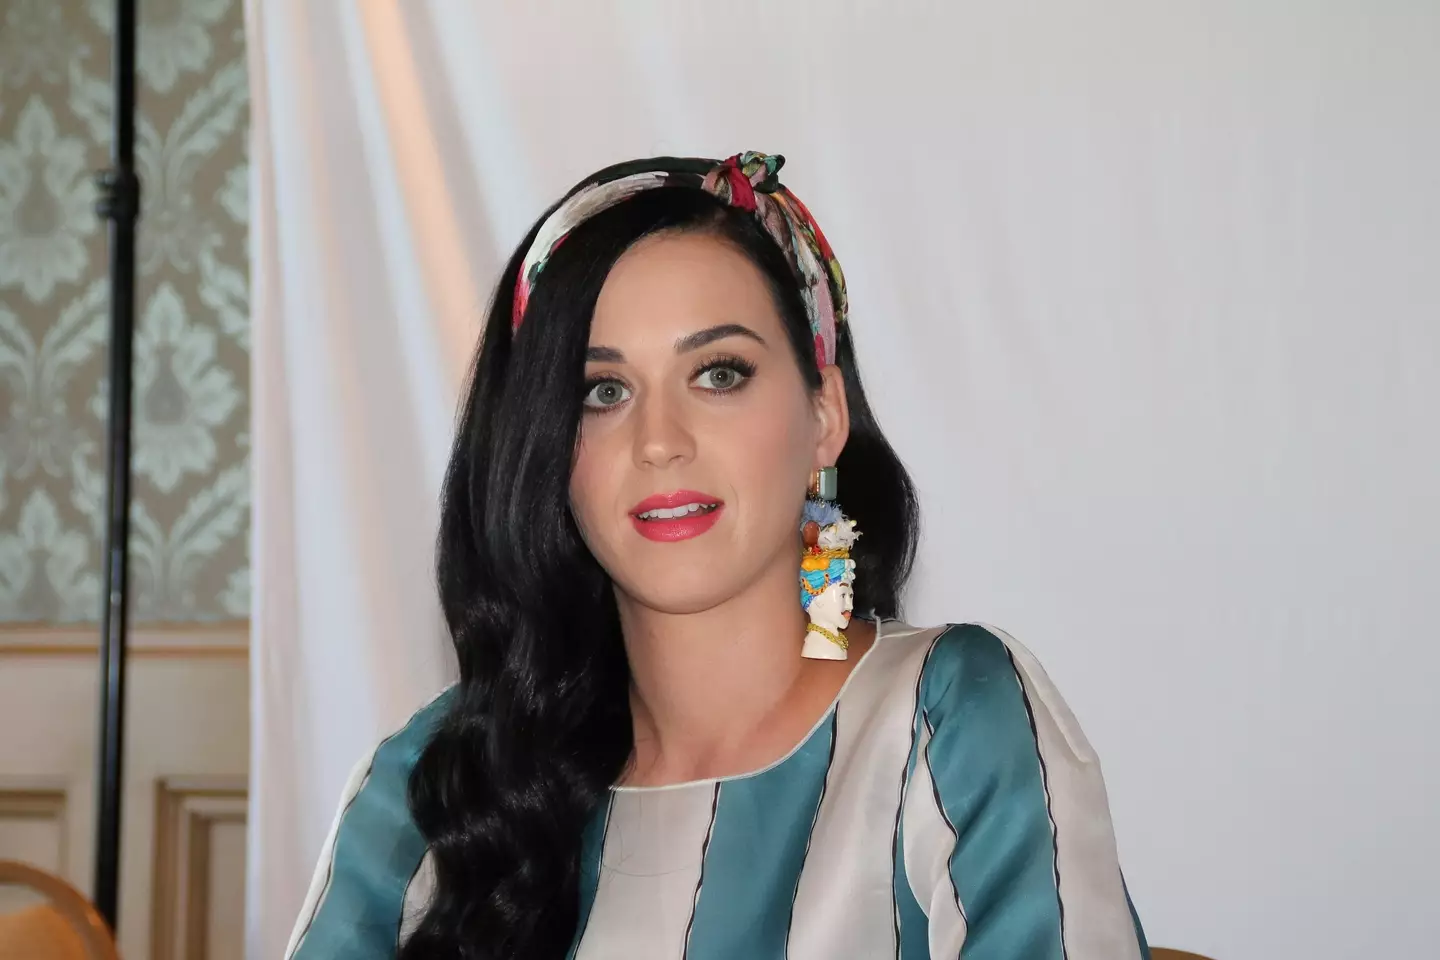 Katy Perry had her first big hit the same year that Katie Perry was trademarked.